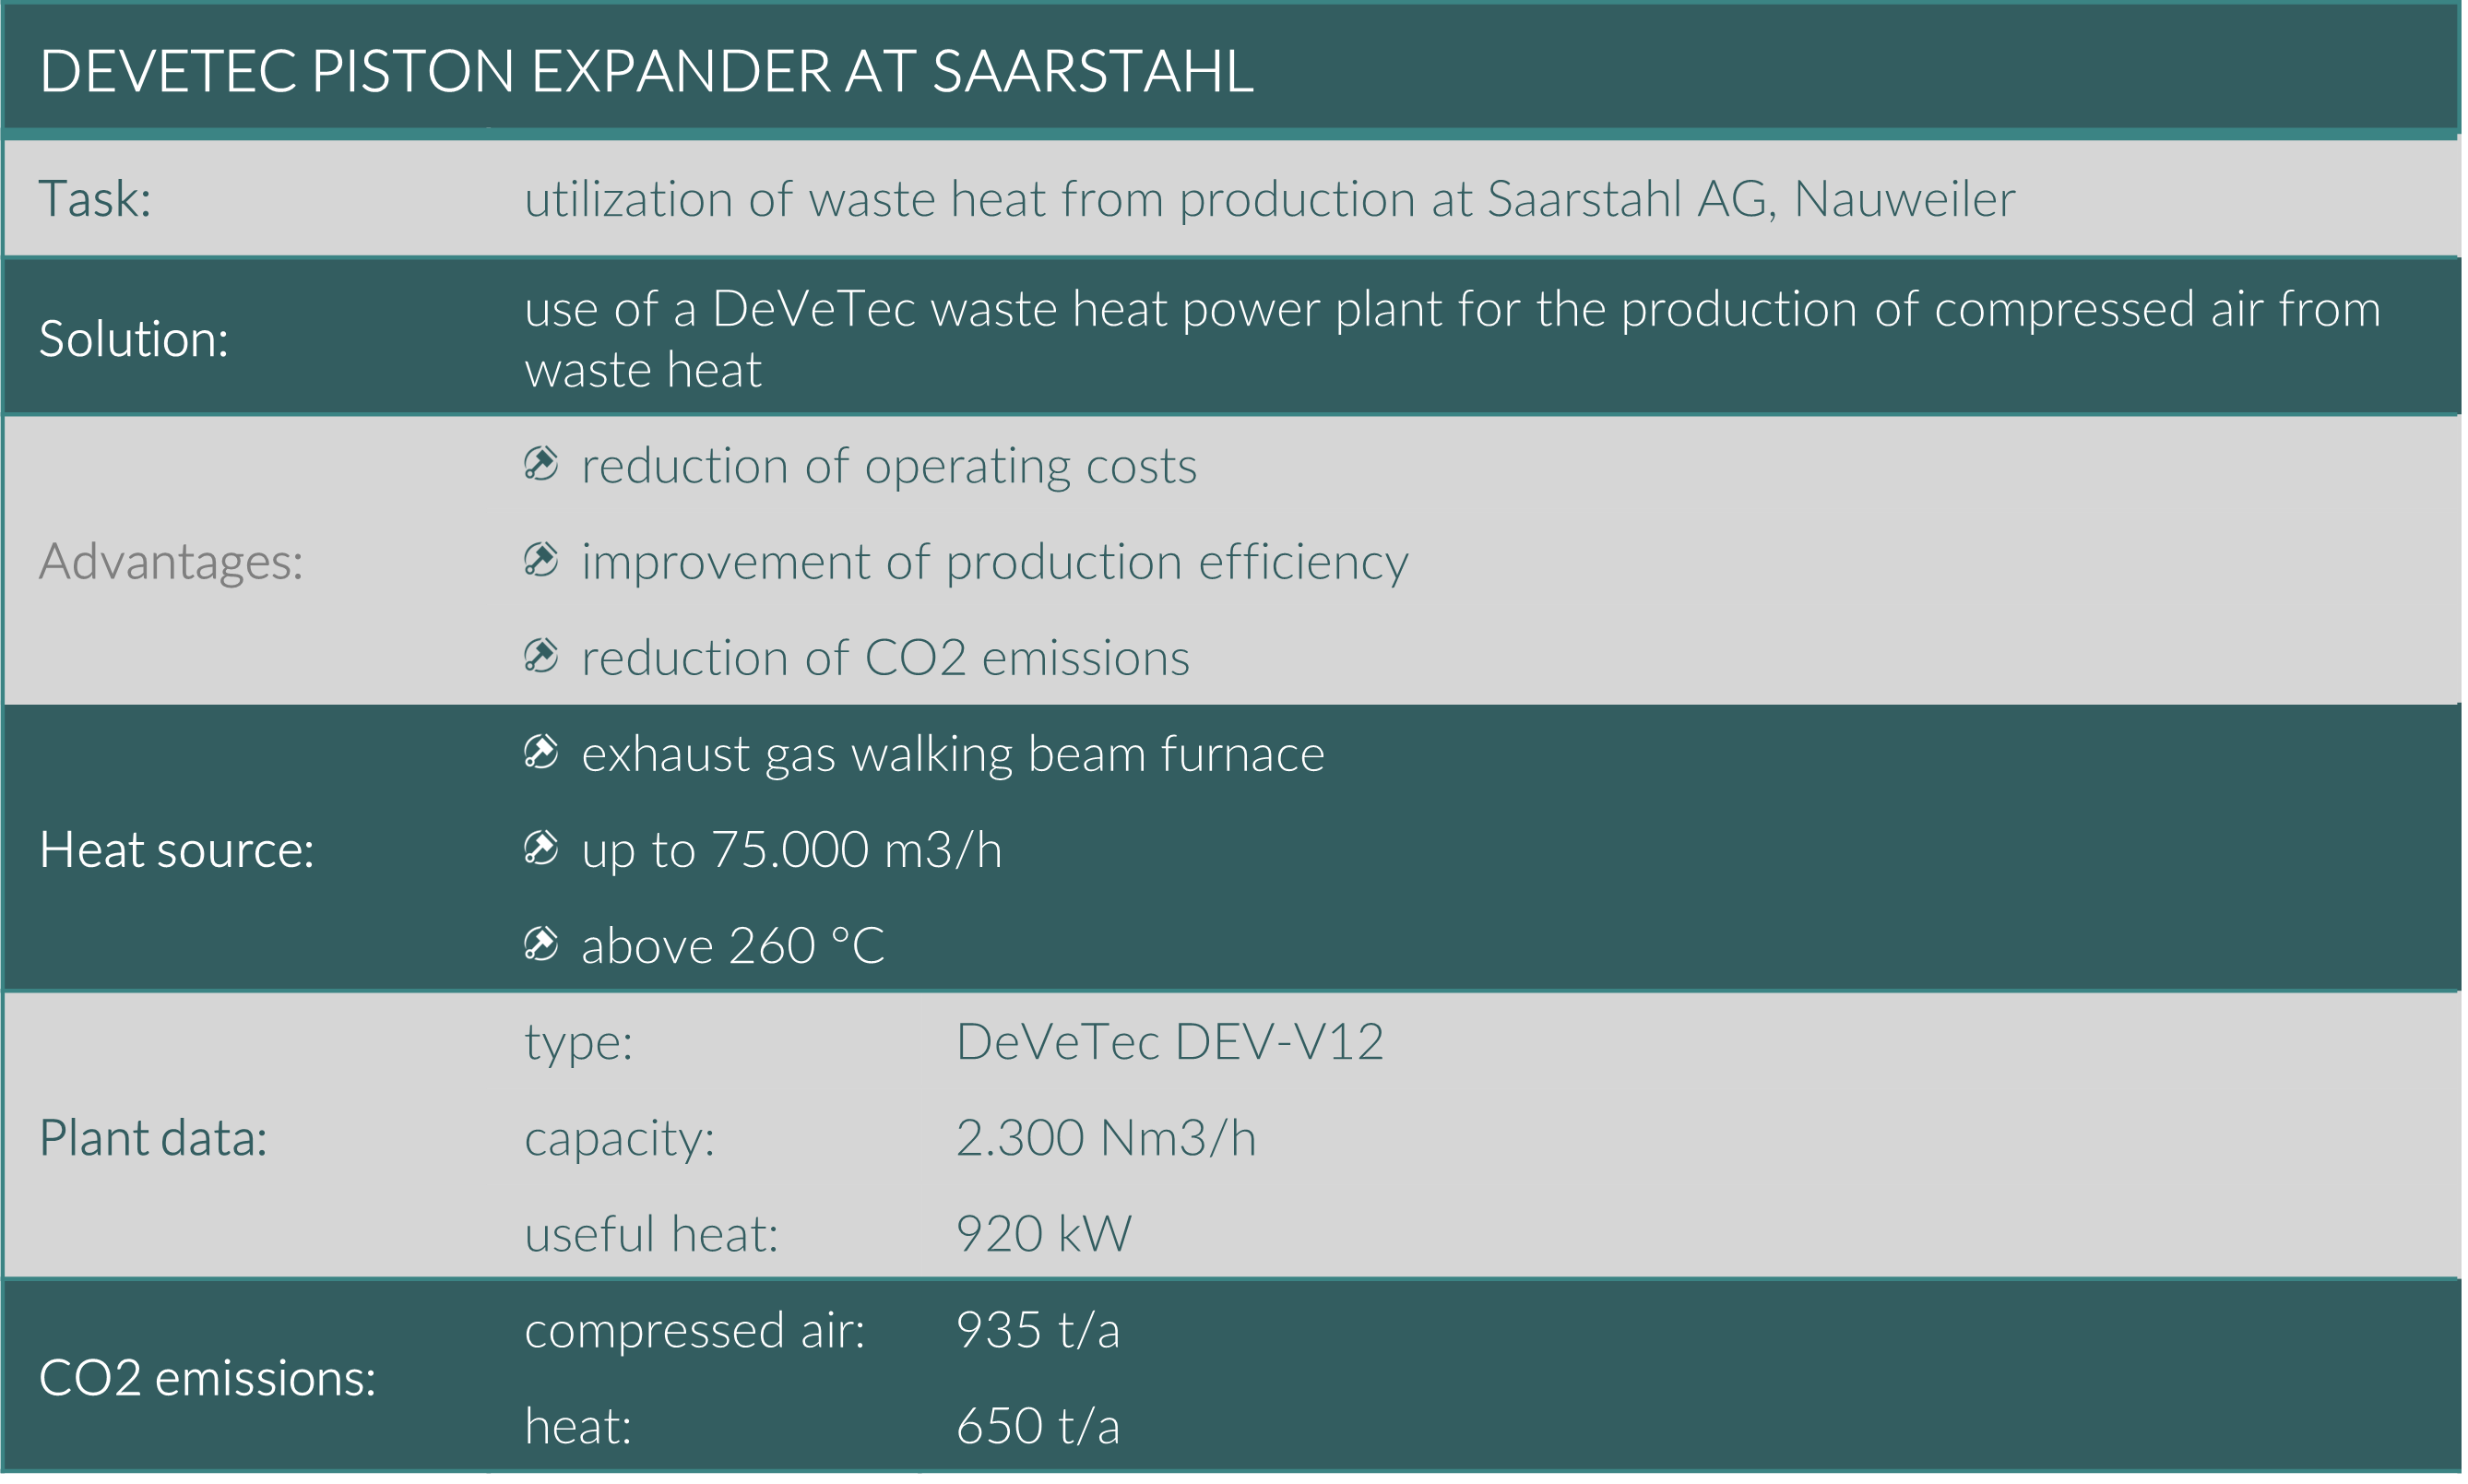 Overview of the DeVeTec waste heat power plant for compressed air production at Saarstahl